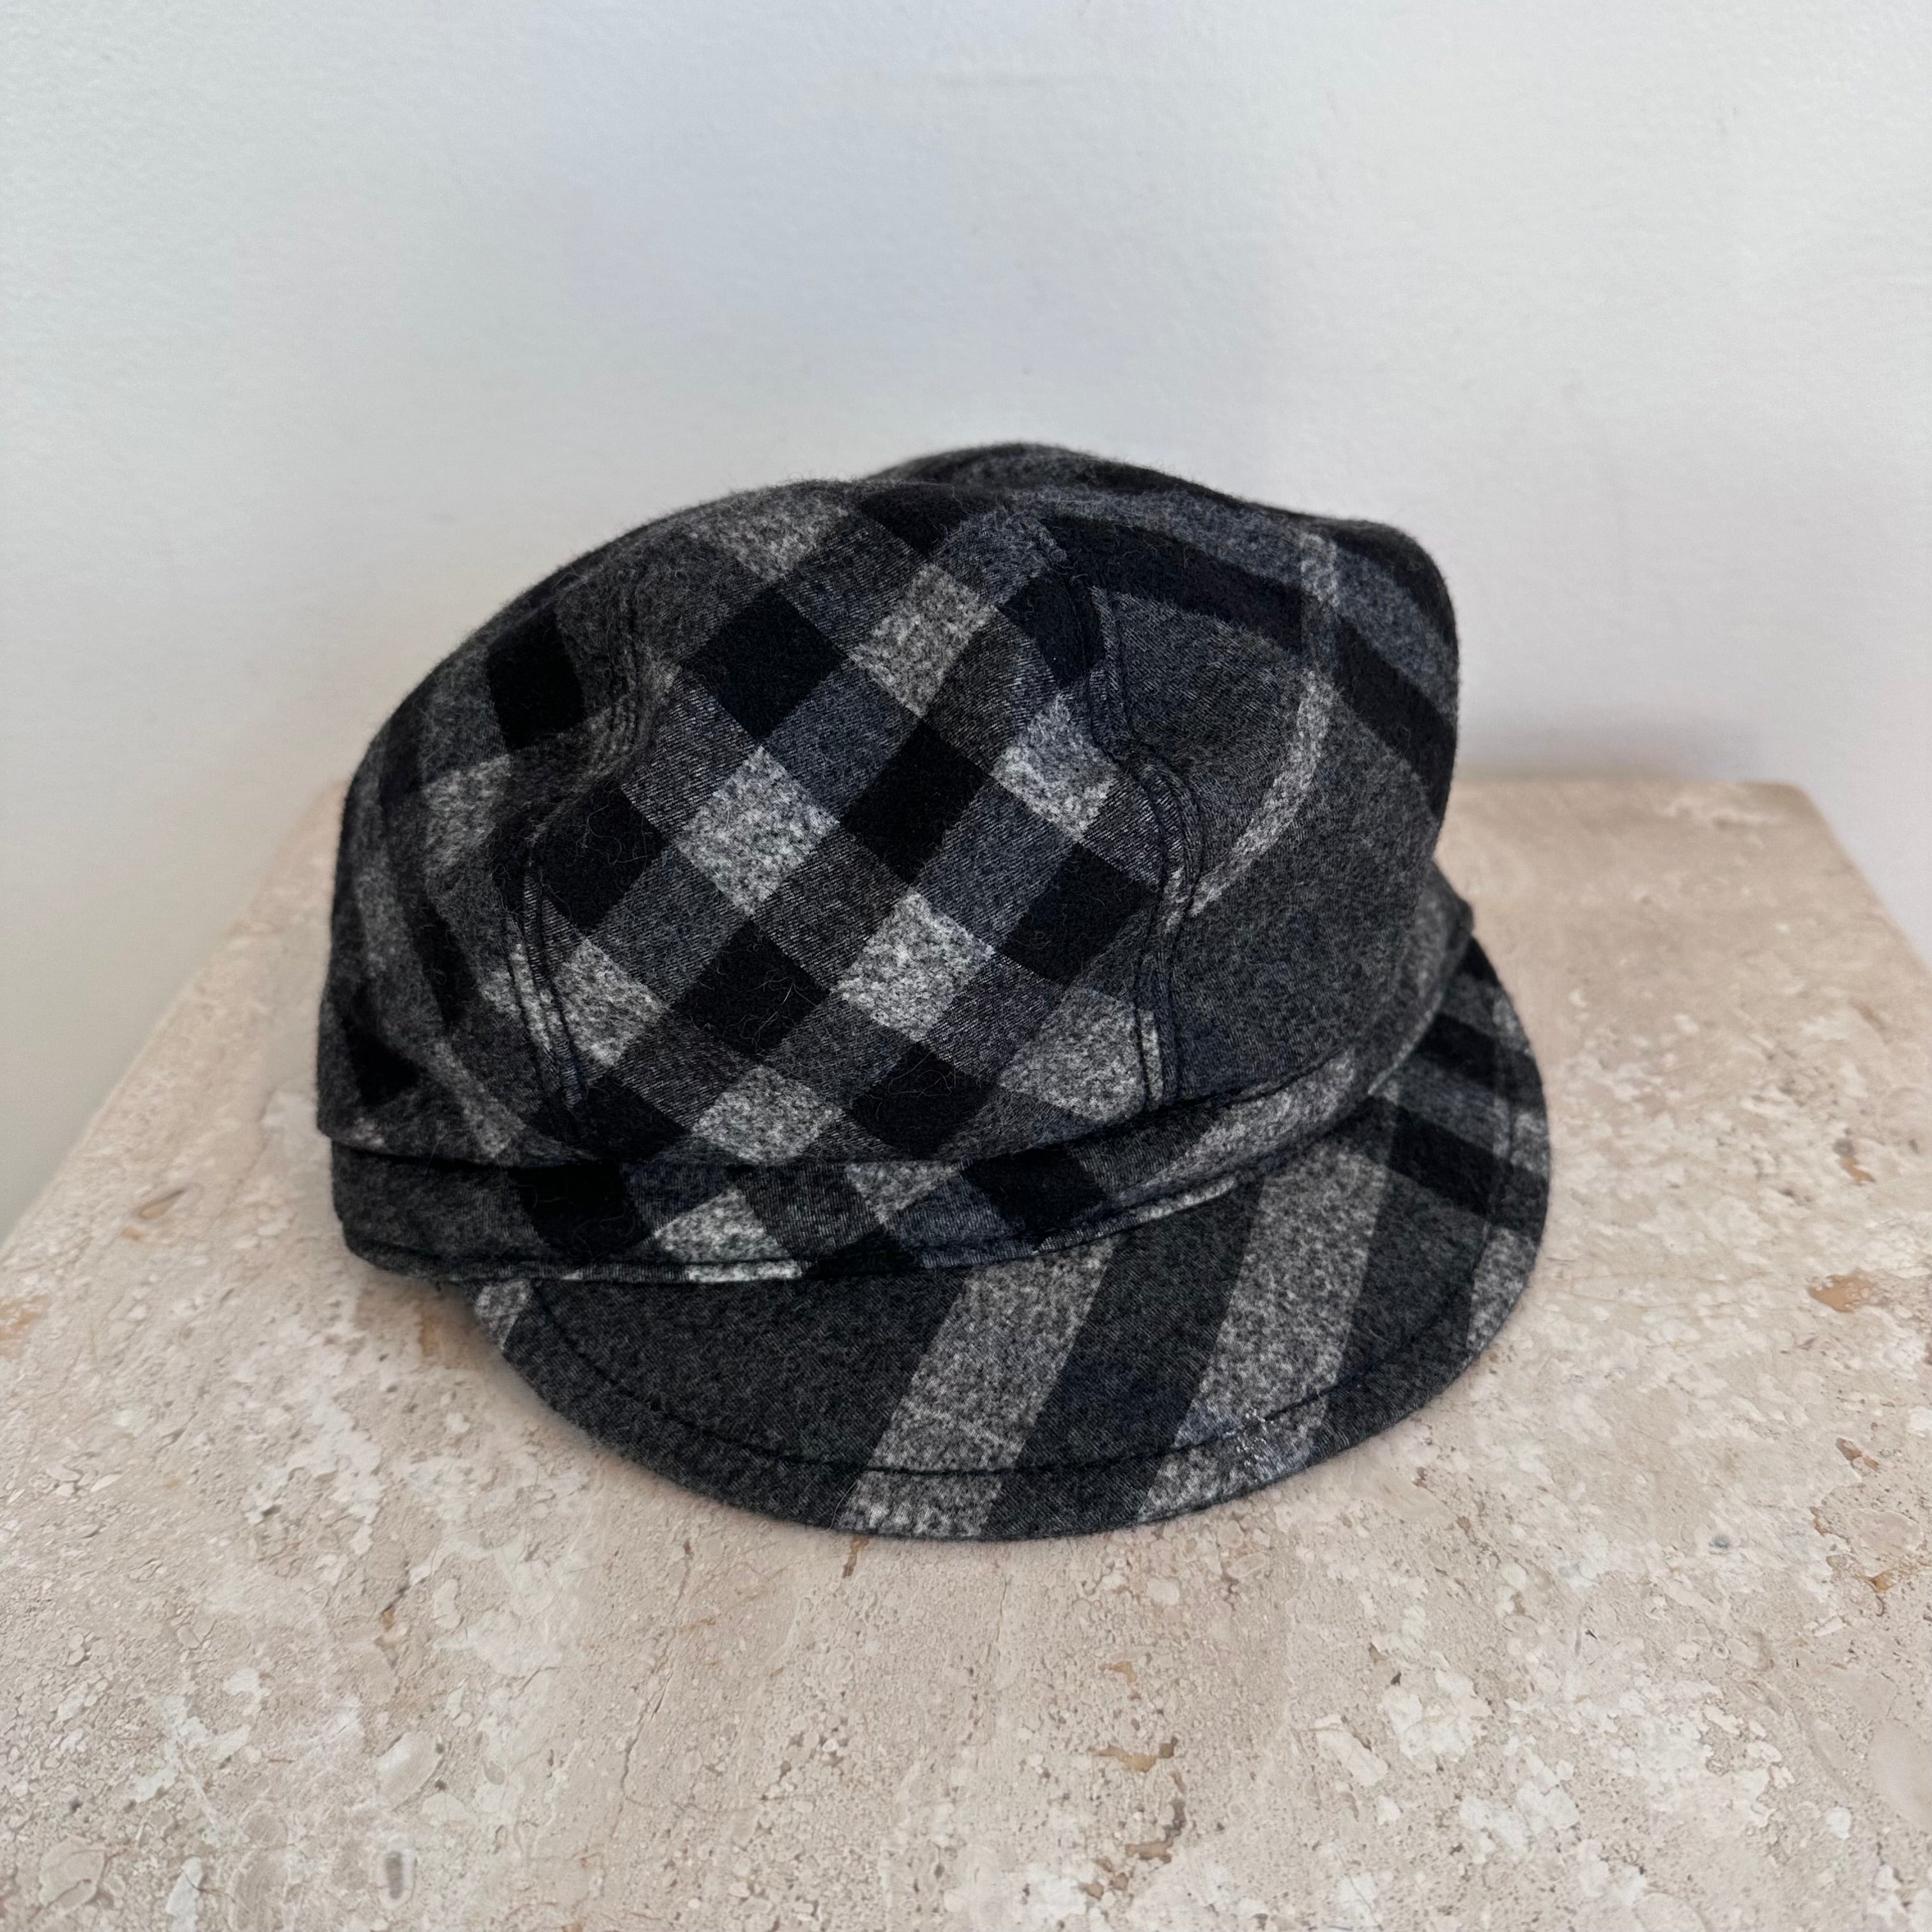 Pre-Owned BURBERRY Grey Wool Plaid Hat - Size Small